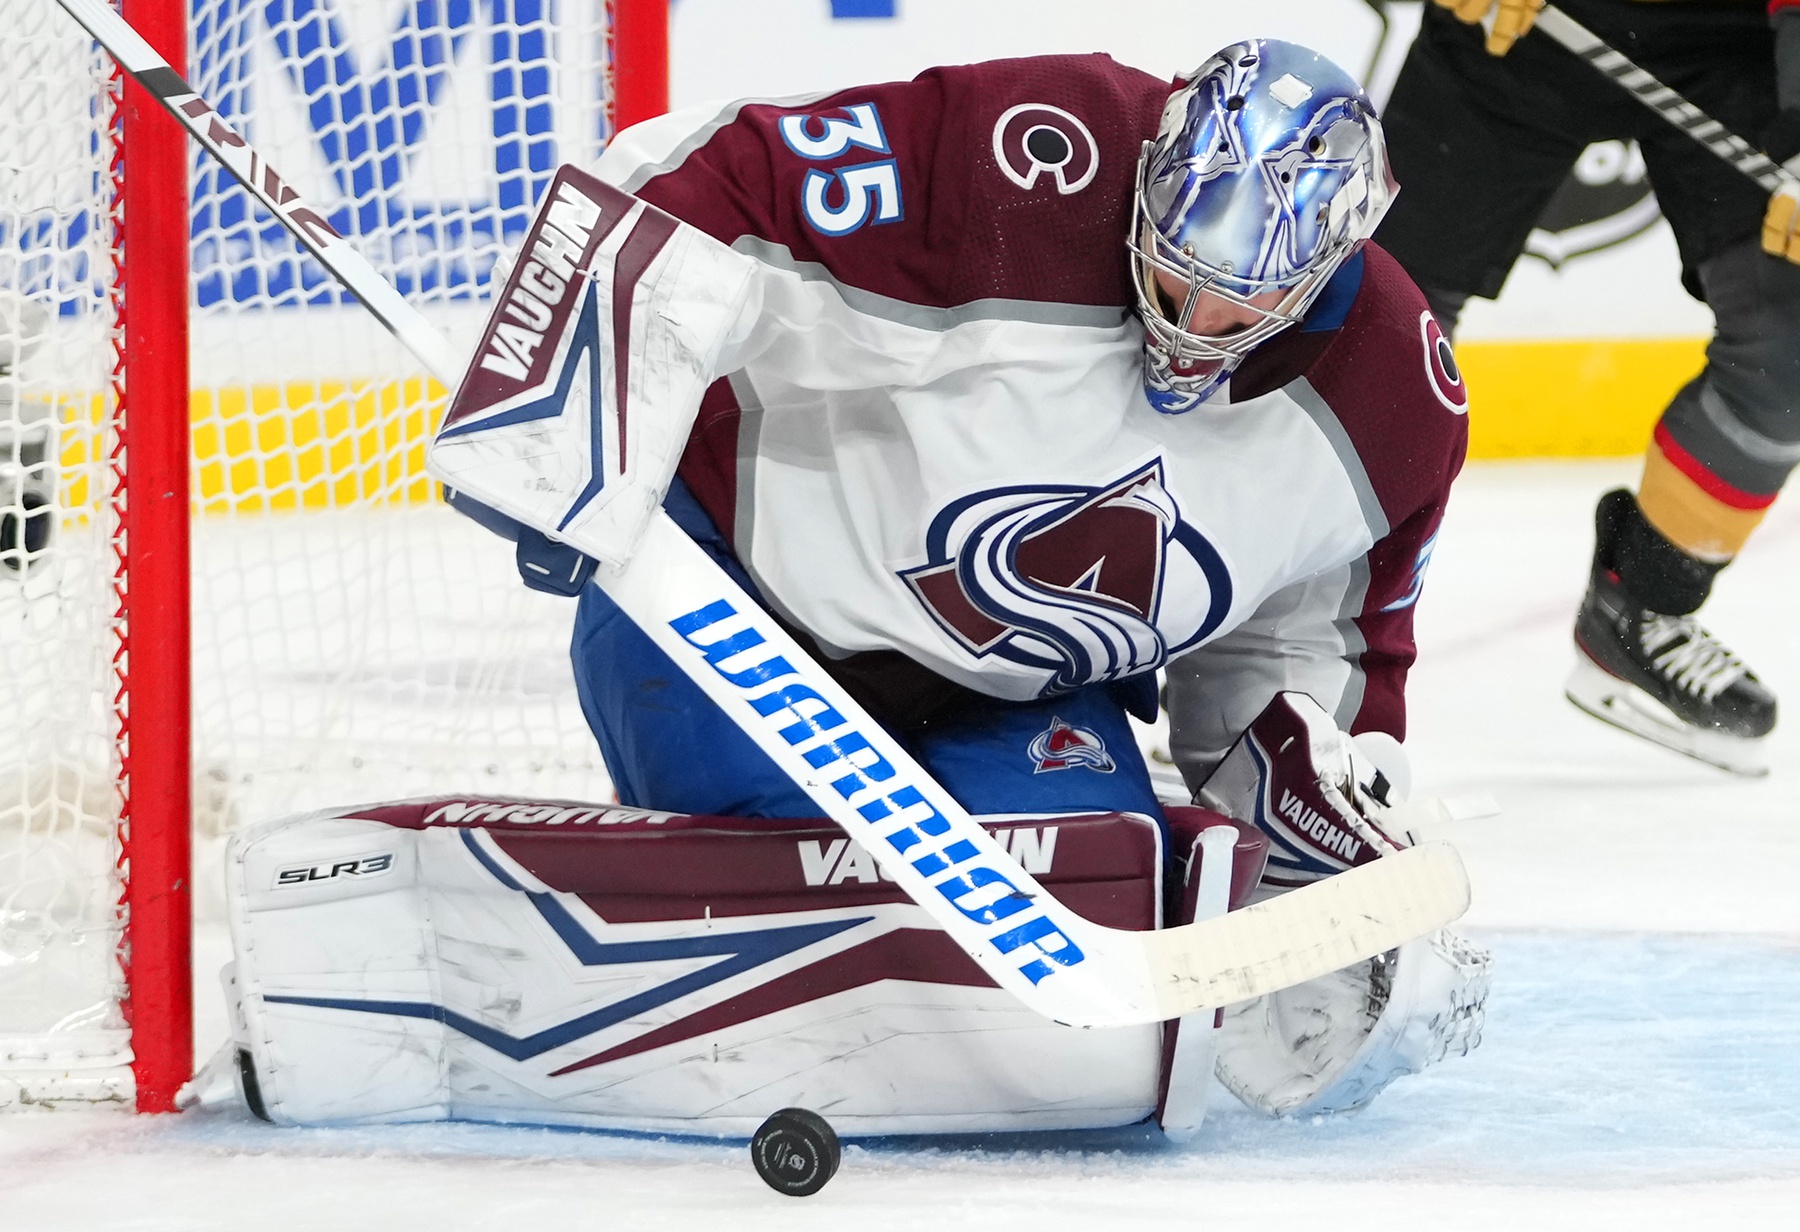 Darcy Kuemper injury: Avalanche goalie ruled out for Game 2, Pavel